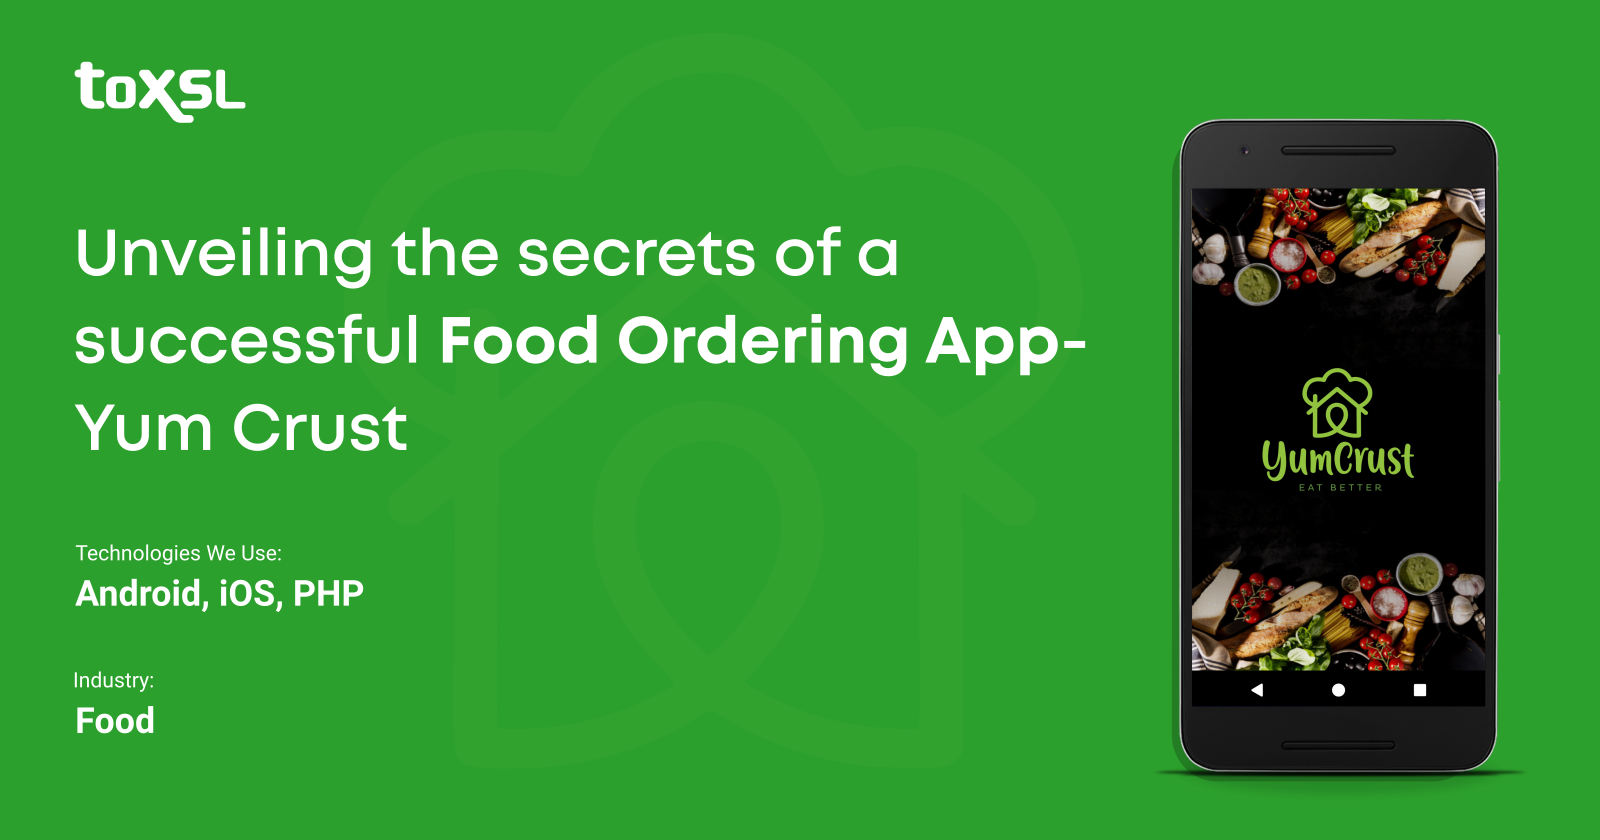 Unveiling the secrets of a successful Food Ordering App - Yum Crust